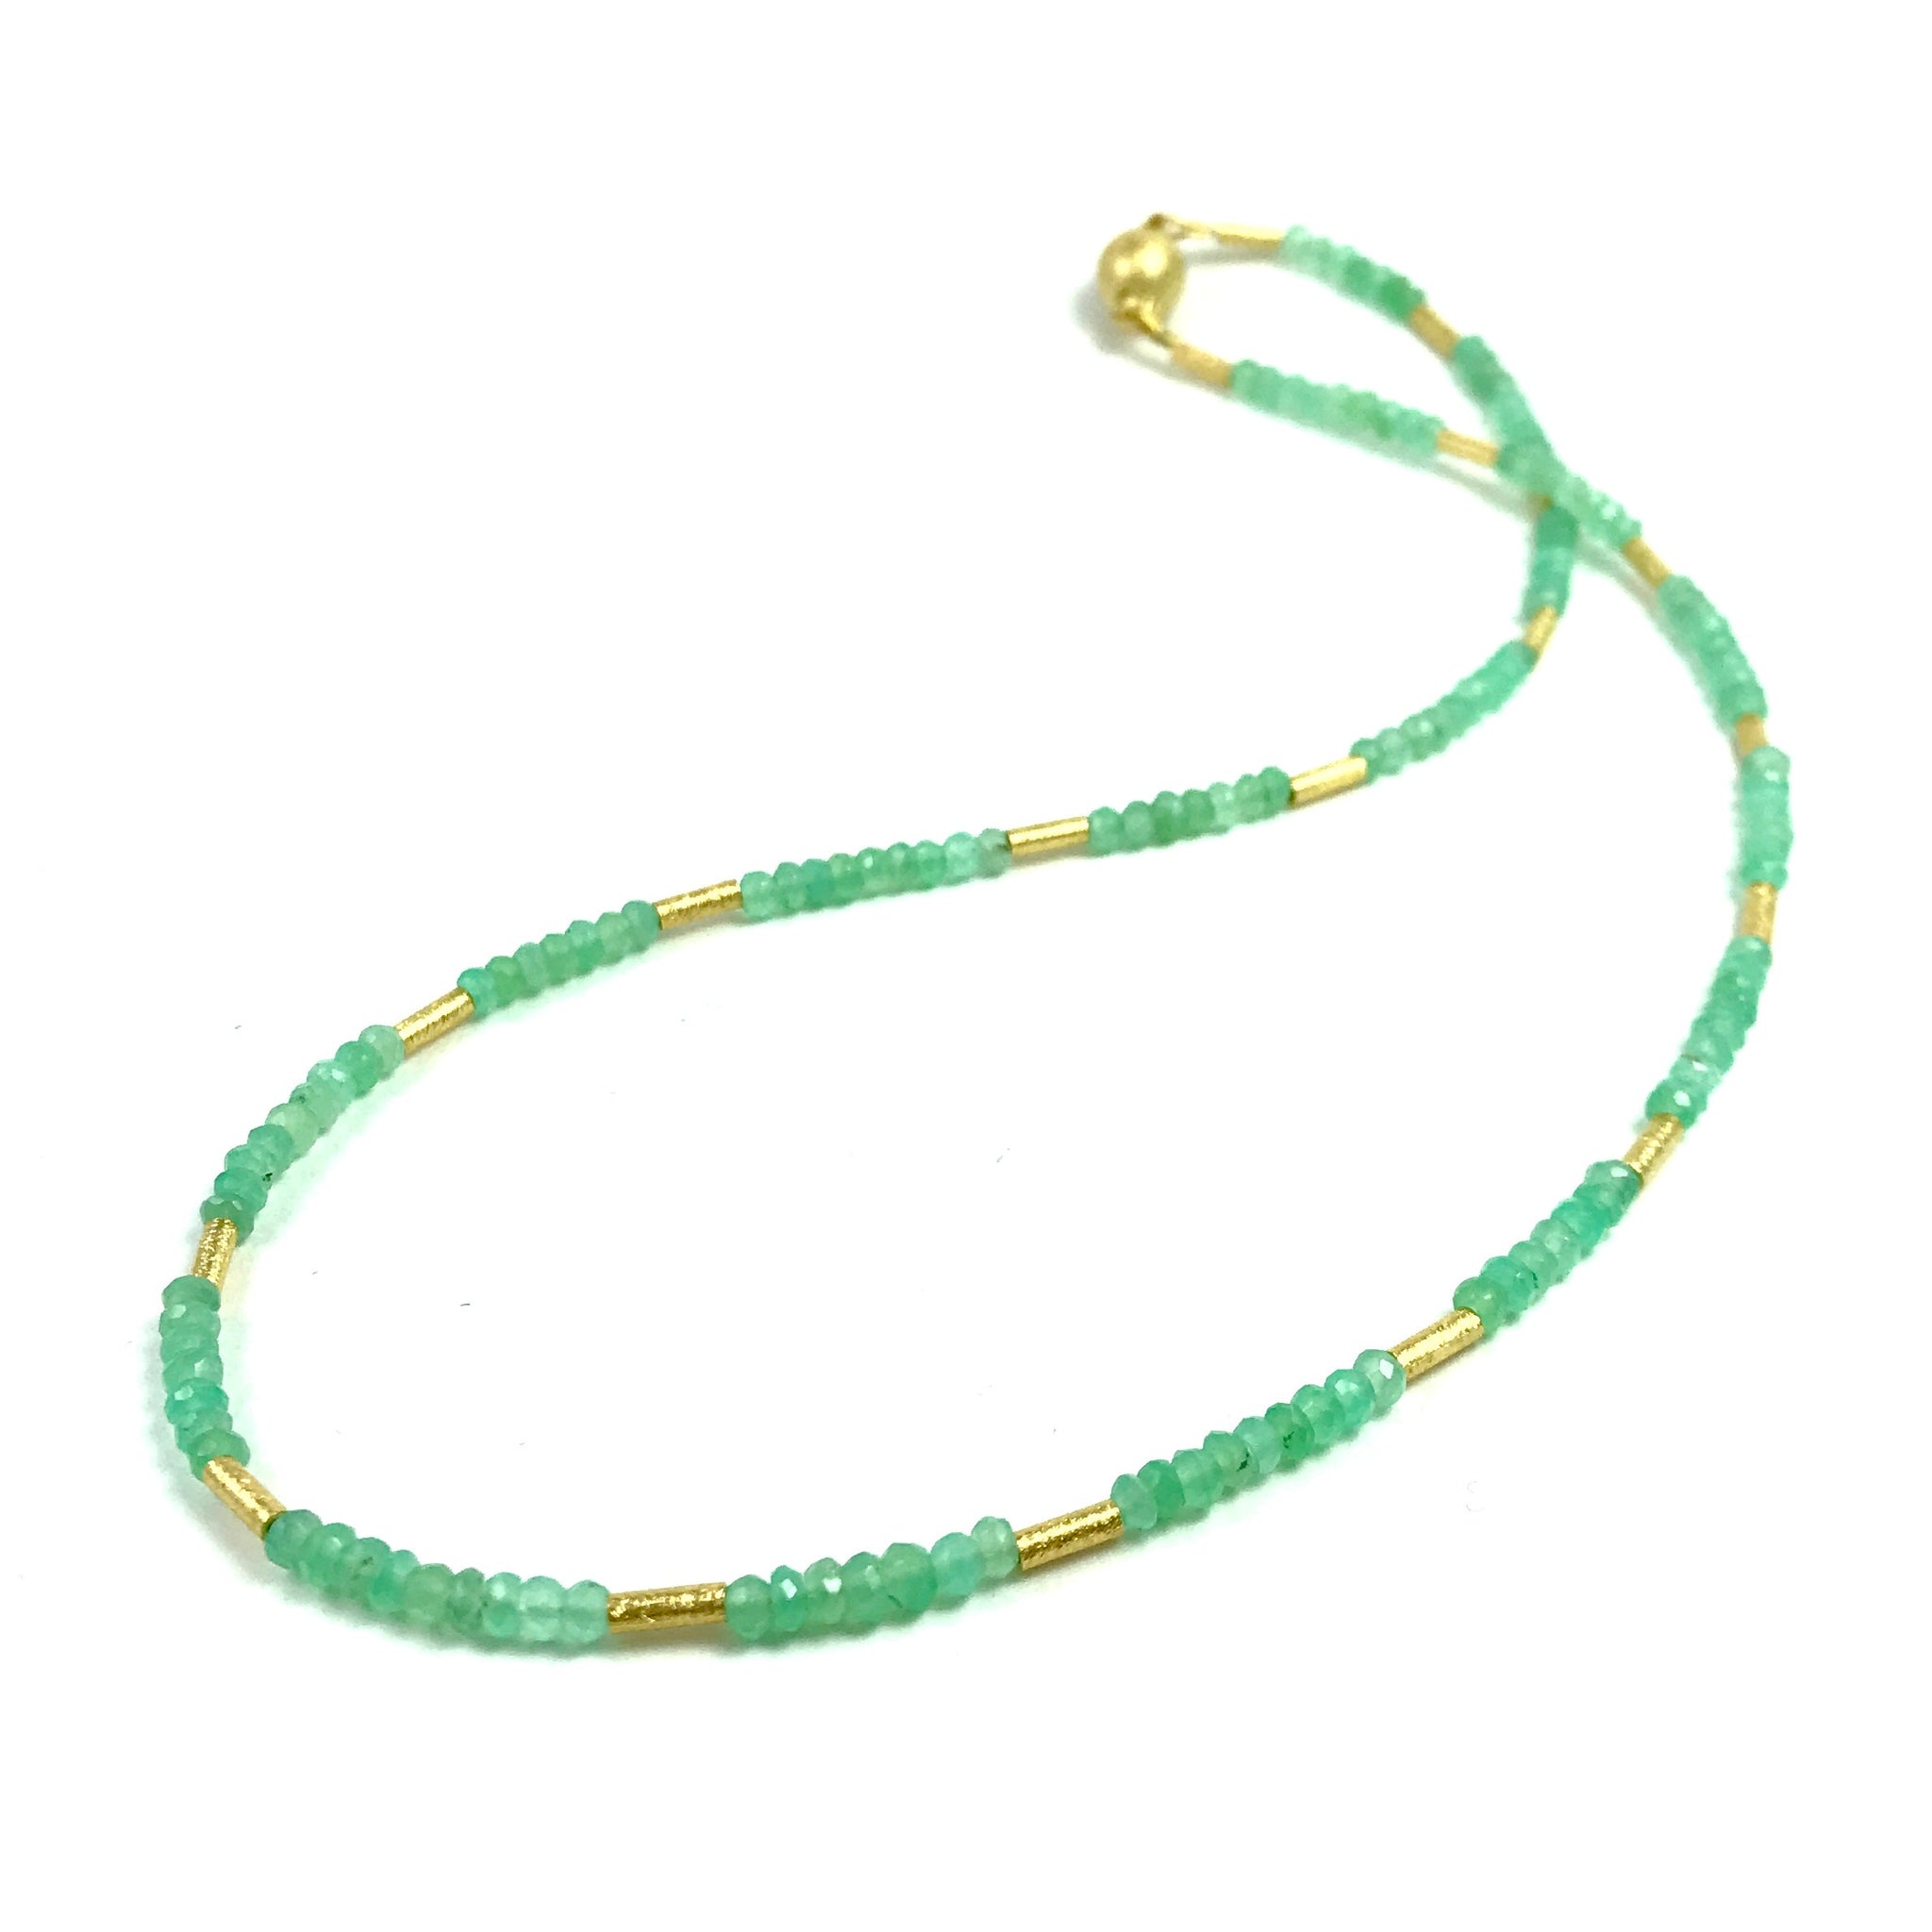 Faceted Chrysoprase Bead Necklace With Gold-Plated Elements